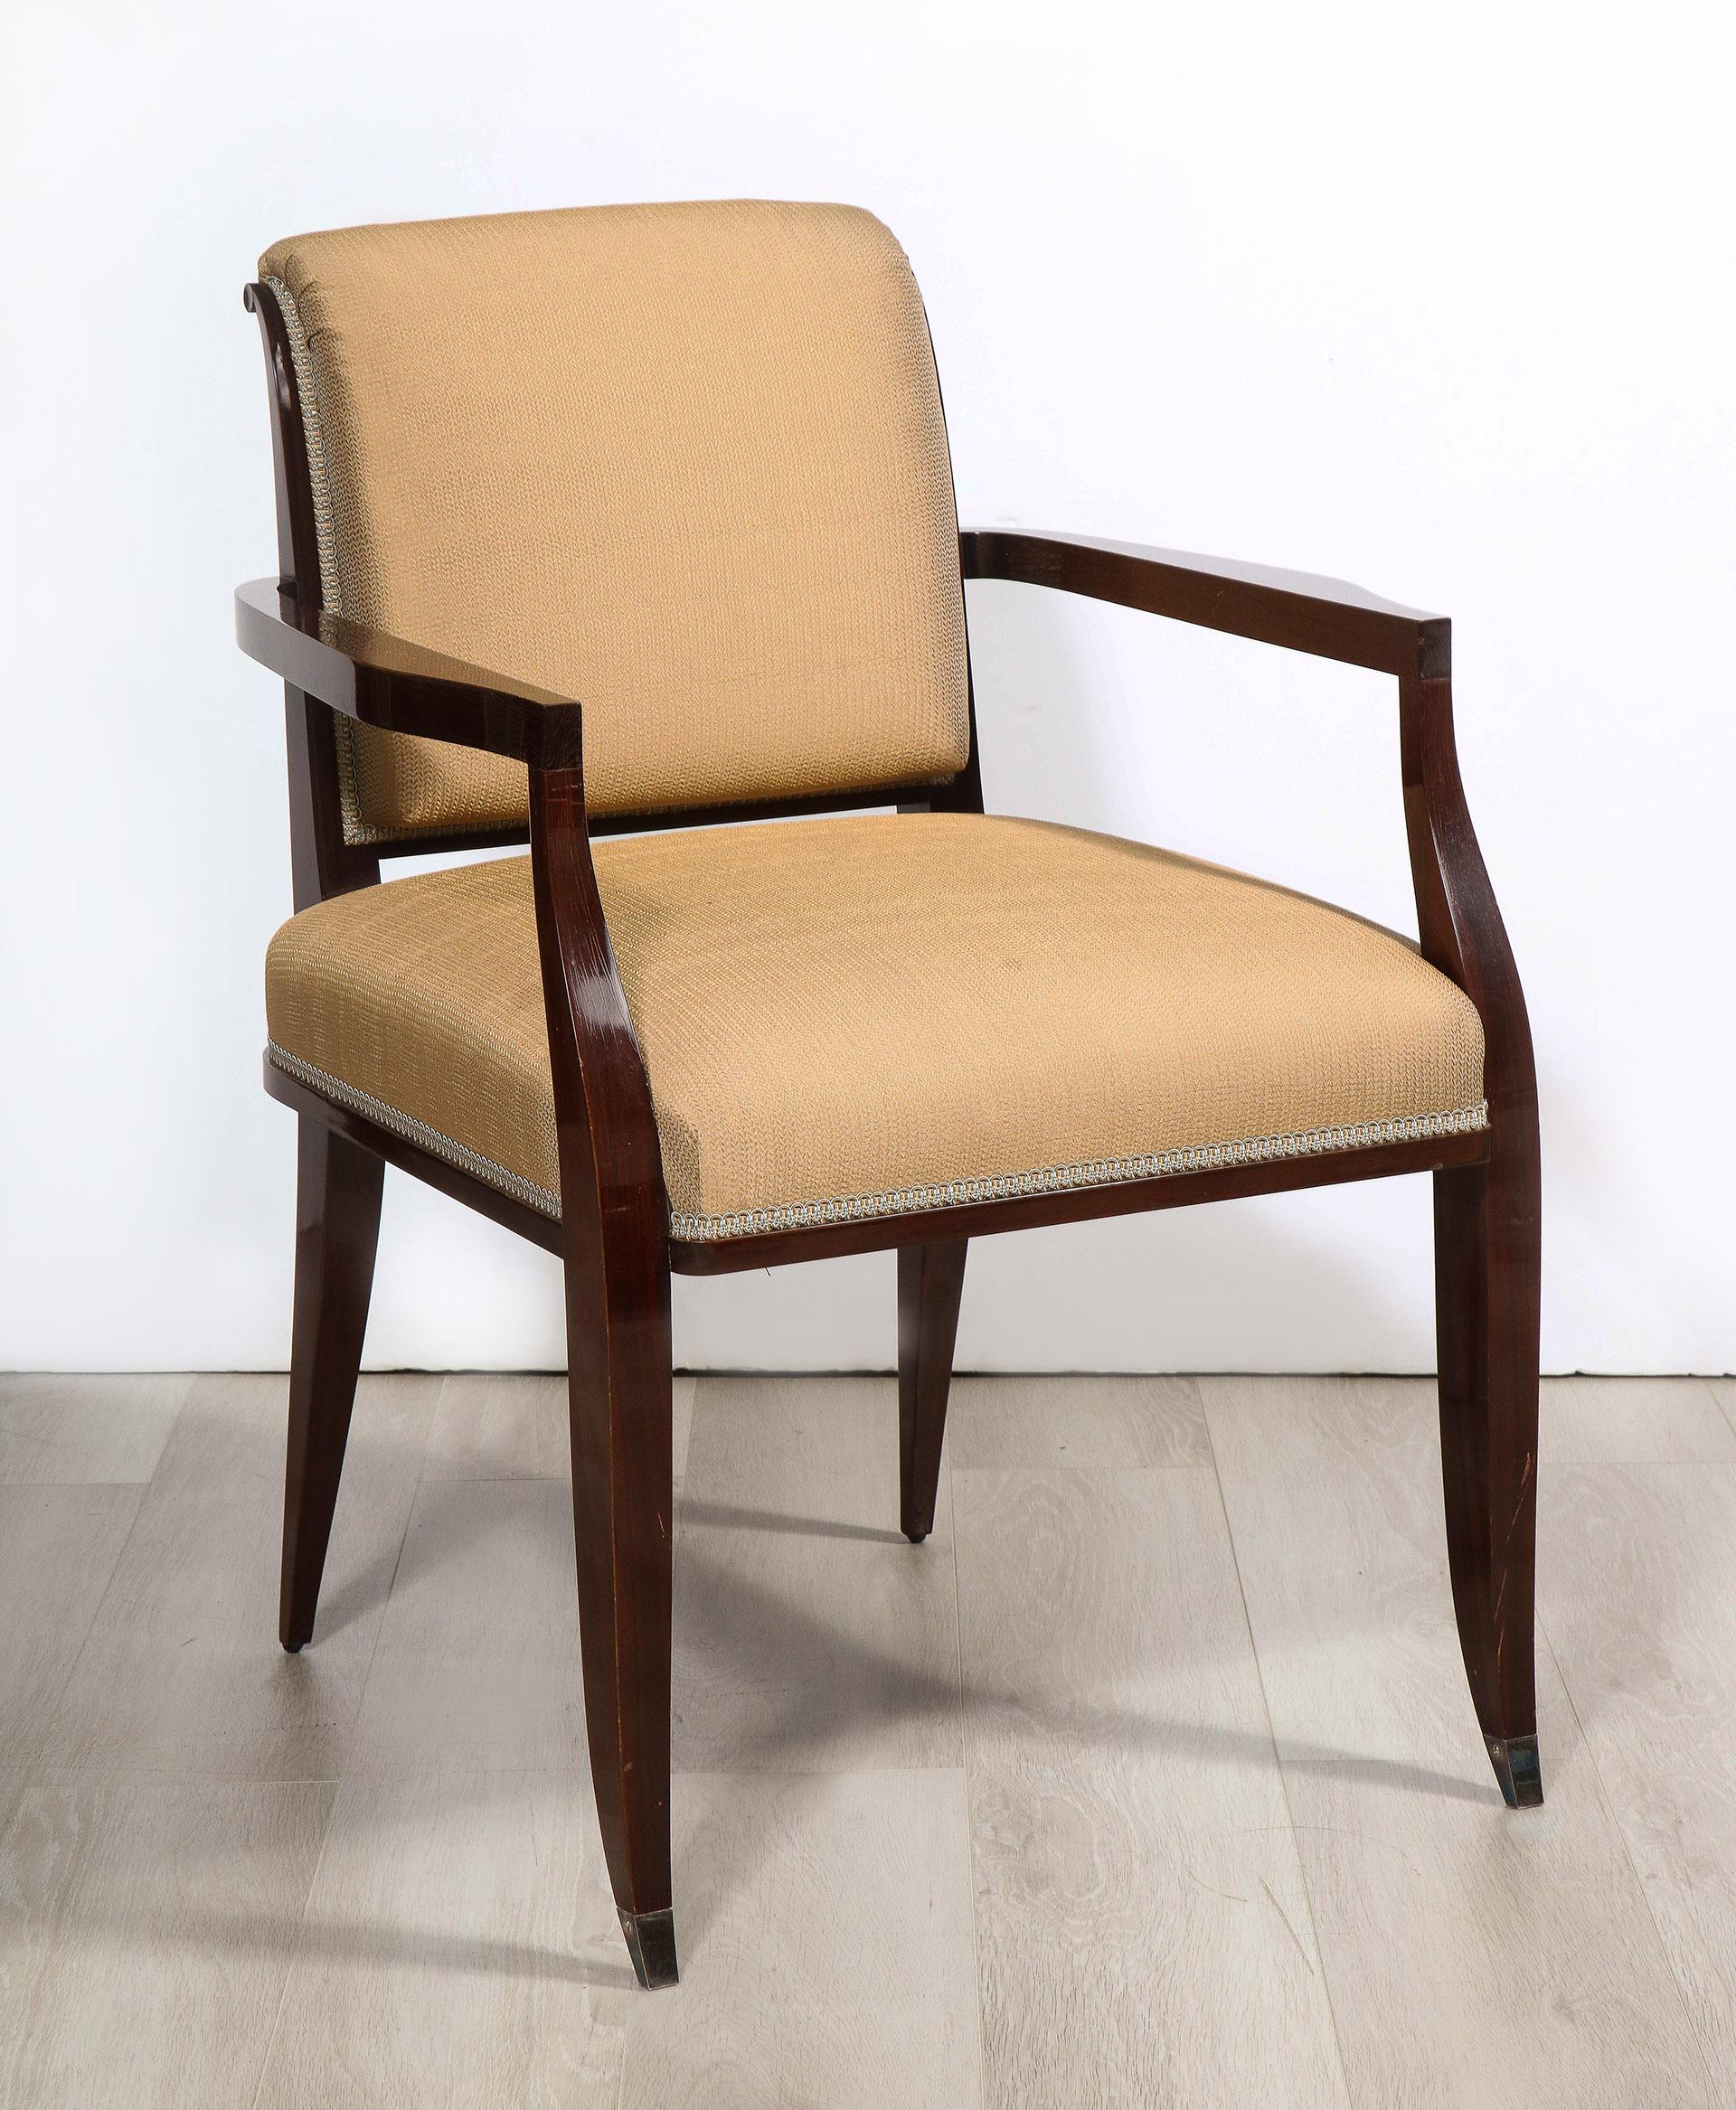 All mahogany chairs each with nickel sabots.

The set consists of 2 arm chairs and 4 side chairs in cream upholstery and 4 side chairs in teal upholstery

Arm: 35